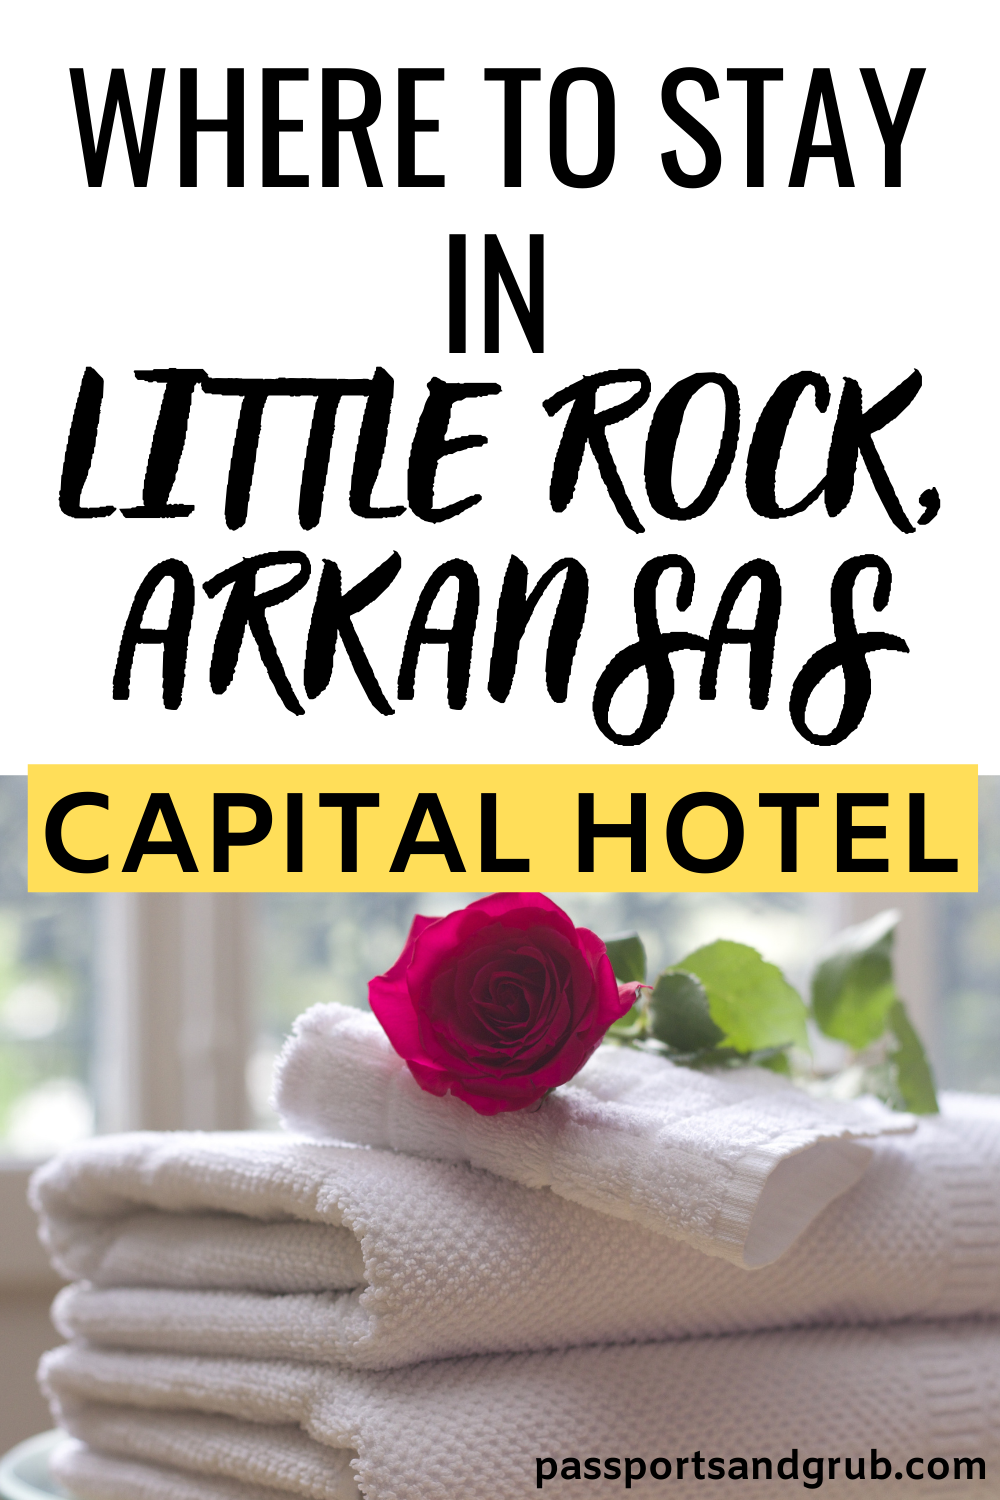 Where to stay in Little Rock